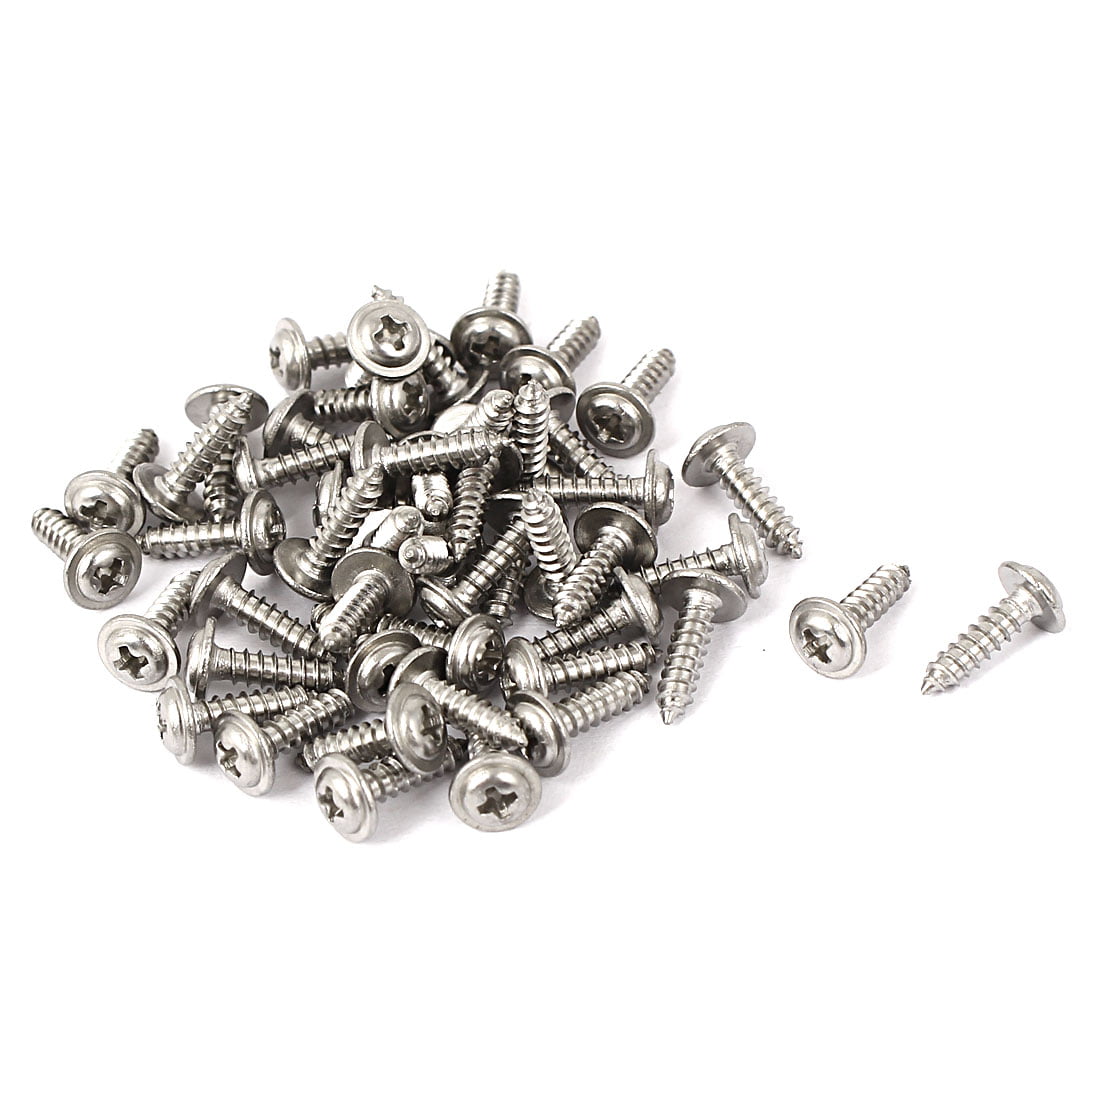 uxcell® 50pcs M2 x 6mm Stainless Steel Phillips Pan Round Head Self Tapping Screws